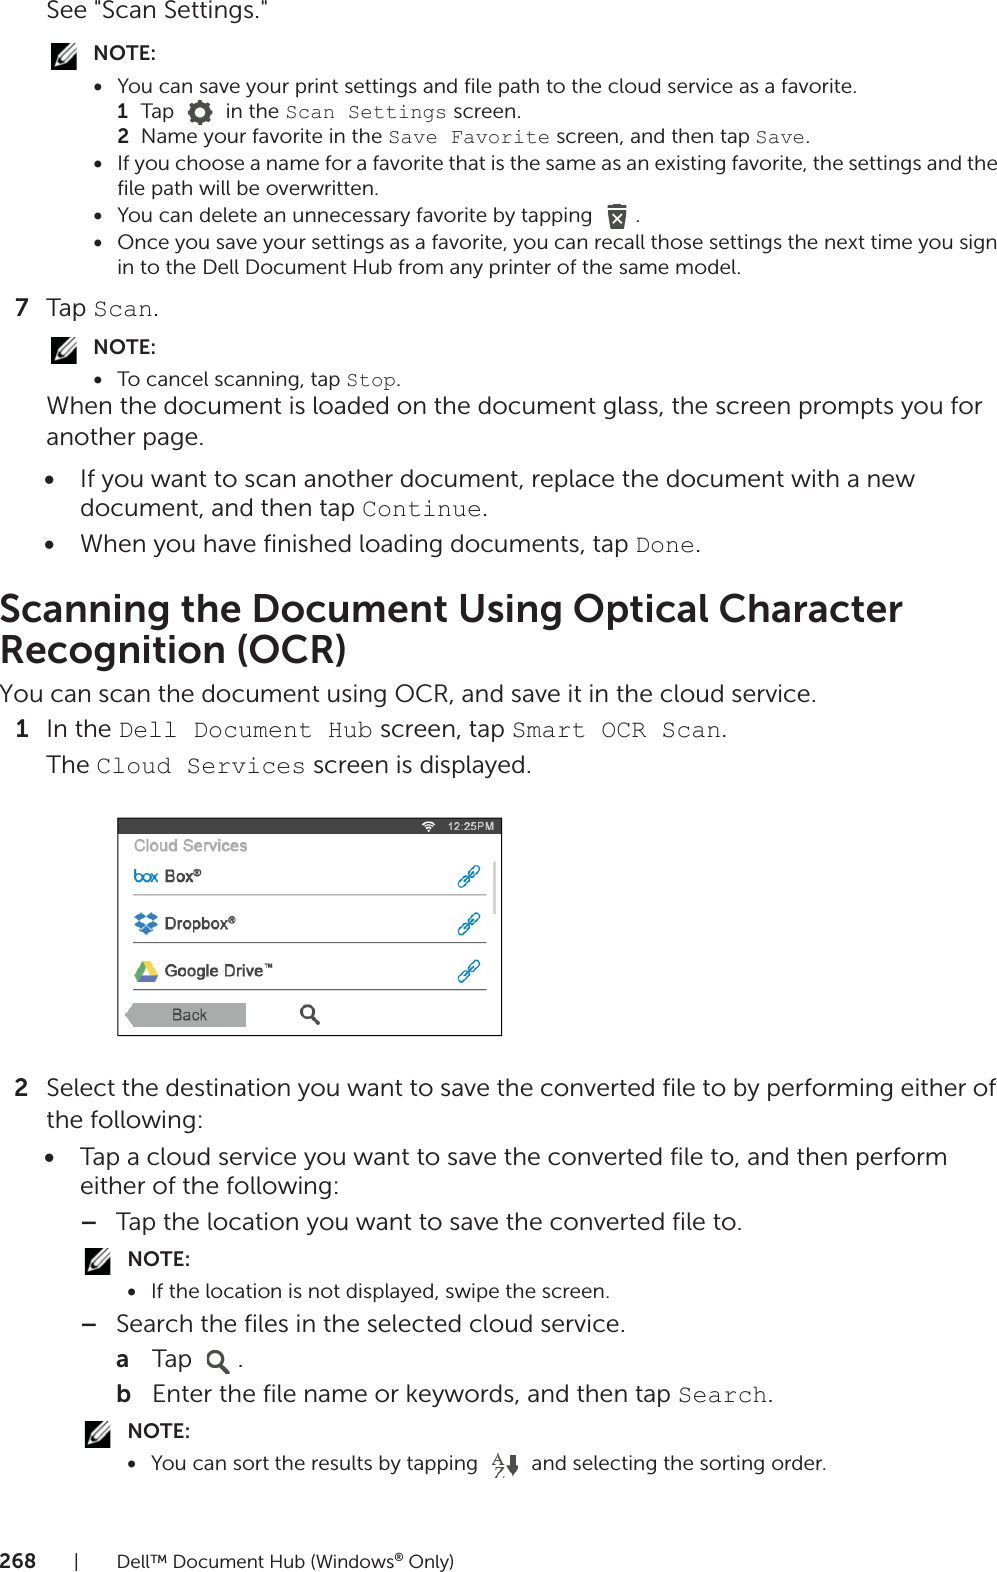 268| Dell™ Document Hub (Windows® Only)See &quot;Scan Settings.&quot;NOTE:•You can save your print settings and file path to the cloud service as a favorite.1Tap   in the Scan Settings screen.2Name your favorite in the Save Favorite screen, and then tap Save.•If you choose a name for a favorite that is the same as an existing favorite, the settings and the file path will be overwritten.•You can delete an unnecessary favorite by tapping  .•Once you save your settings as a favorite, you can recall those settings the next time you sign in to the Dell Document Hub from any printer of the same model.7Tap Scan.NOTE:•To cancel scanning, tap Stop.When the document is loaded on the document glass, the screen prompts you for another page.•If you want to scan another document, replace the document with a new document, and then tap Continue.•When you have finished loading documents, tap Done.Scanning the Document Using Optical Character Recognition (OCR)You can scan the document using OCR, and save it in the cloud service.1In the Dell Document Hub screen, tap Smart OCR Scan.The Cloud Services screen is displayed.2Select the destination you want to save the converted file to by performing either of the following:•Tap a cloud service you want to save the converted file to, and then perform either of the following:–Tap the location you want to save the converted file to.NOTE:•If the location is not displayed, swipe the screen.–Search the files in the selected cloud service.aTap .bEnter the file name or keywords, and then tap Search.NOTE:•You can sort the results by tapping   and selecting the sorting order.